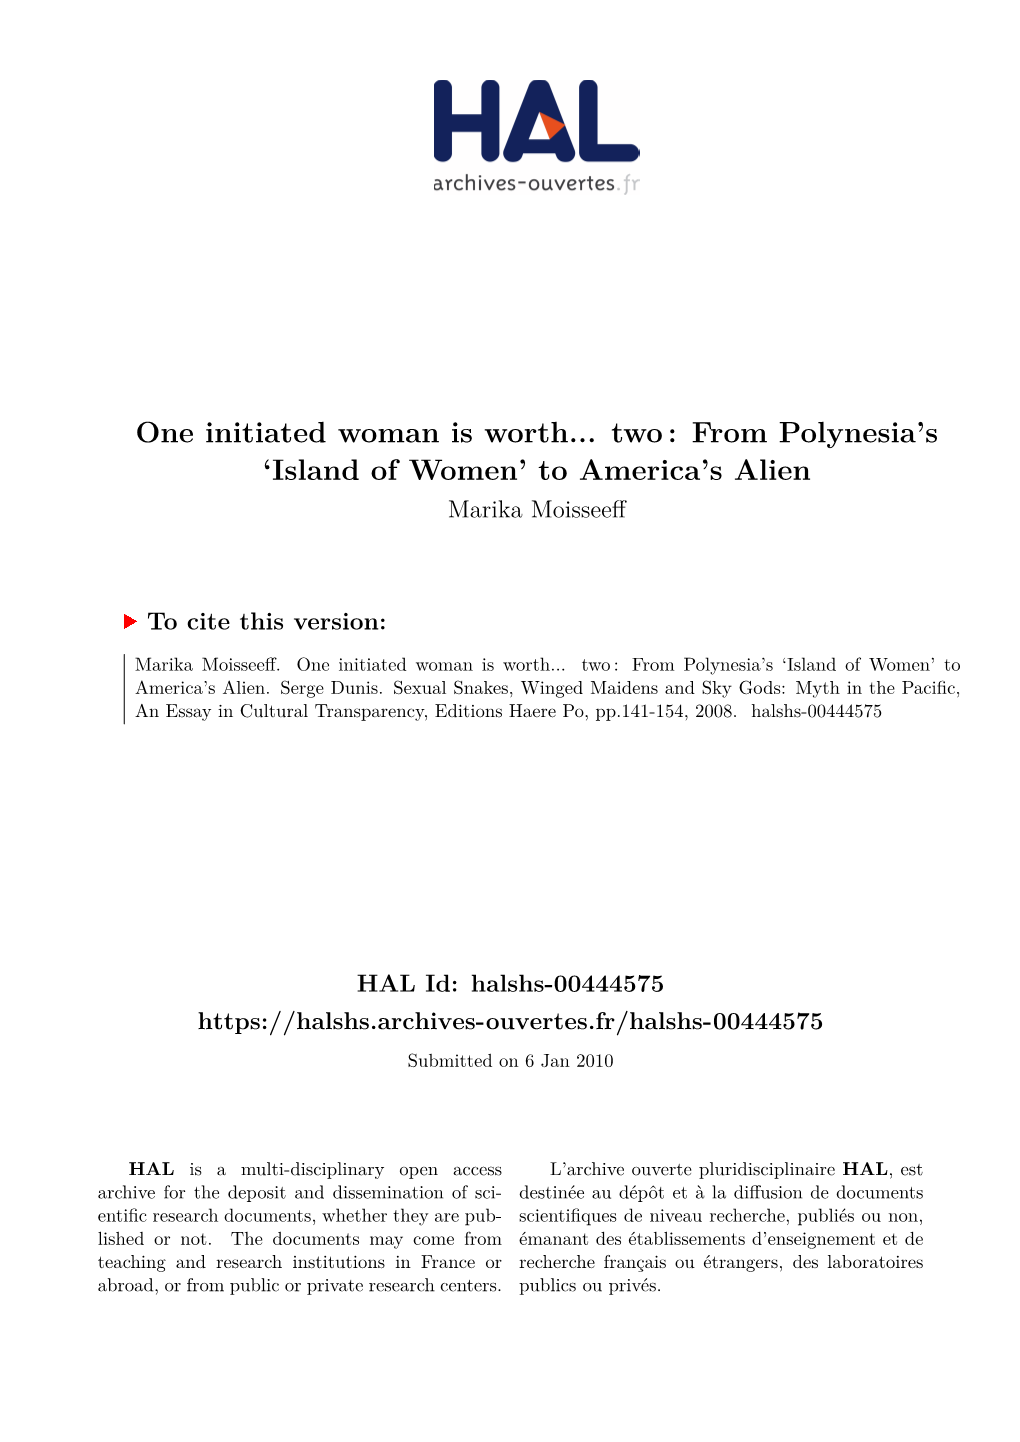 One Initiated Woman Is Worth... Two: from Polynesia's 'Island of Women